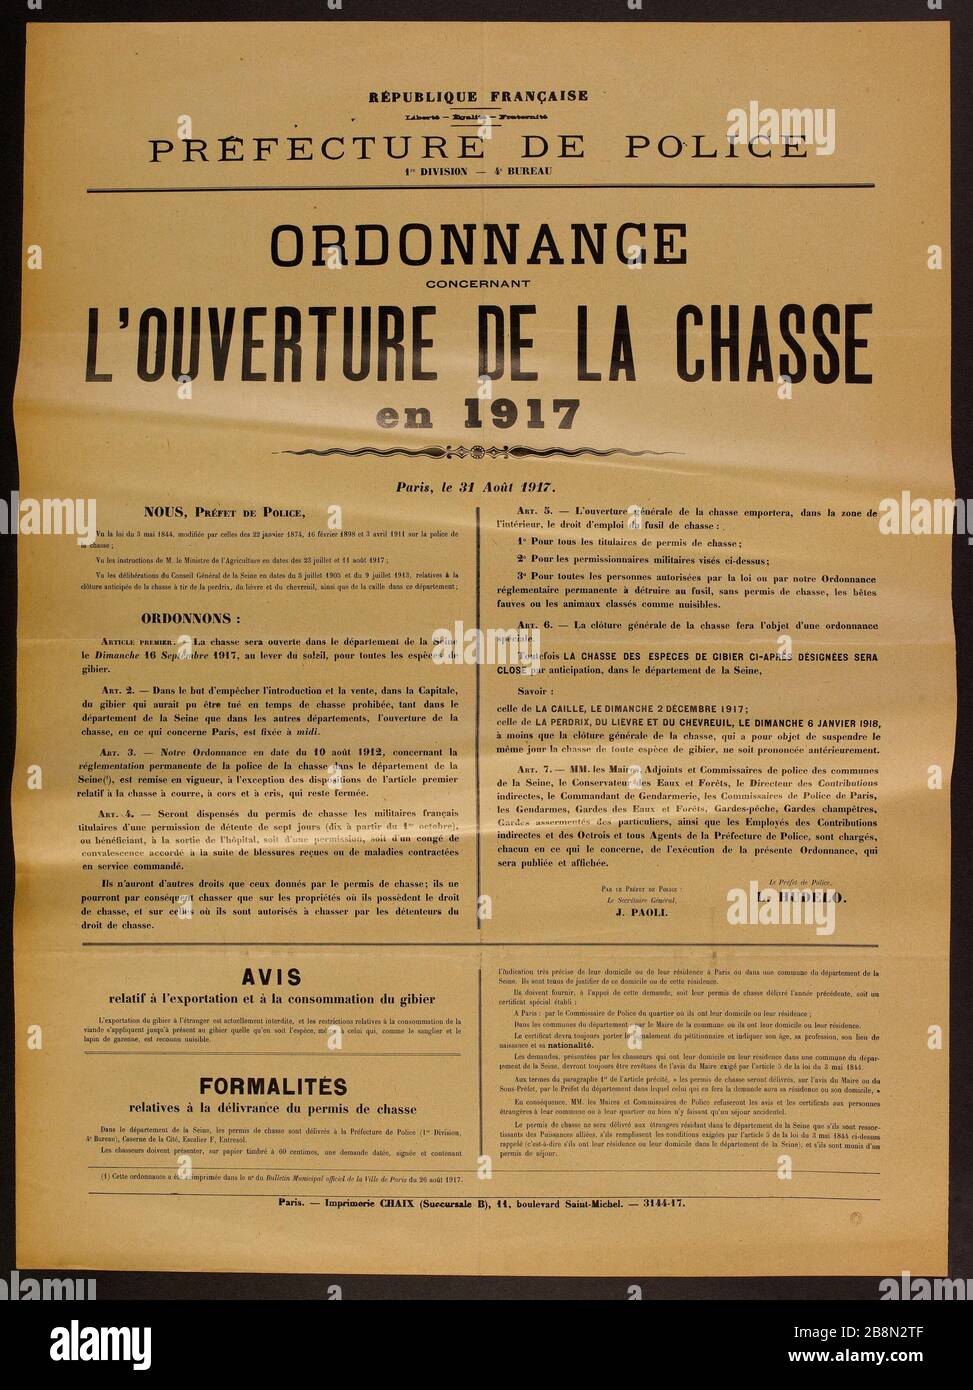 FRENCH REPUBLIC, Liberty - Equality - Fraternity prefecture POLICE DIVISION  1st - 4th OFFICE ORDINANCE OF THE OPENING OF THE HUNTING 1917 Préfecture de  police, 1ère division - 4ème bureau. Affiche d'information. "